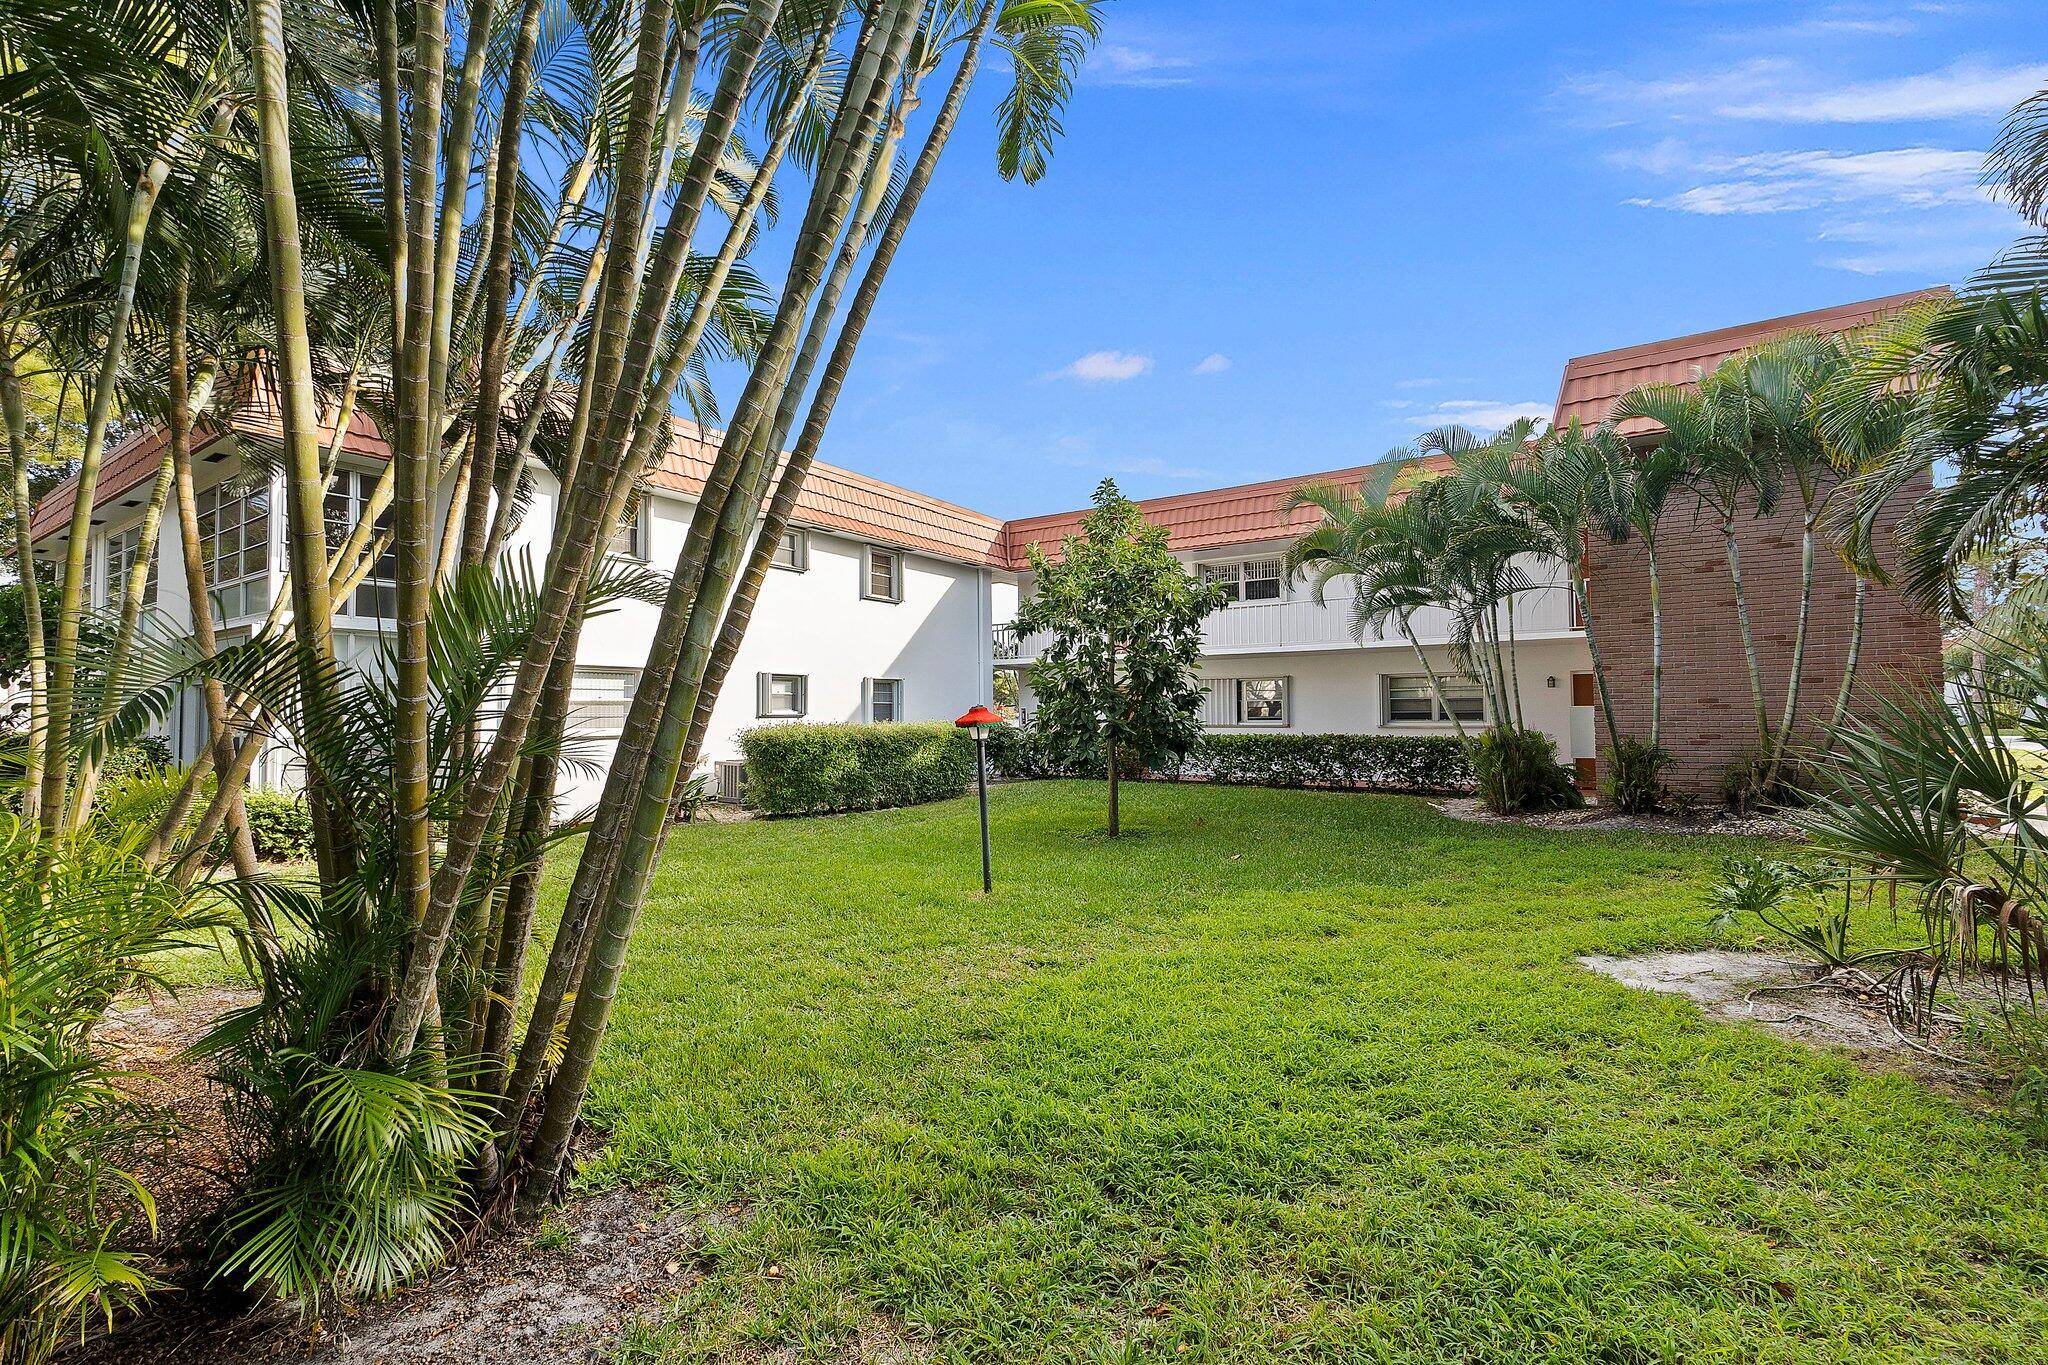 2Bed 2Bath corner condo fully furnished on the 2nd floor in Vista Pines.